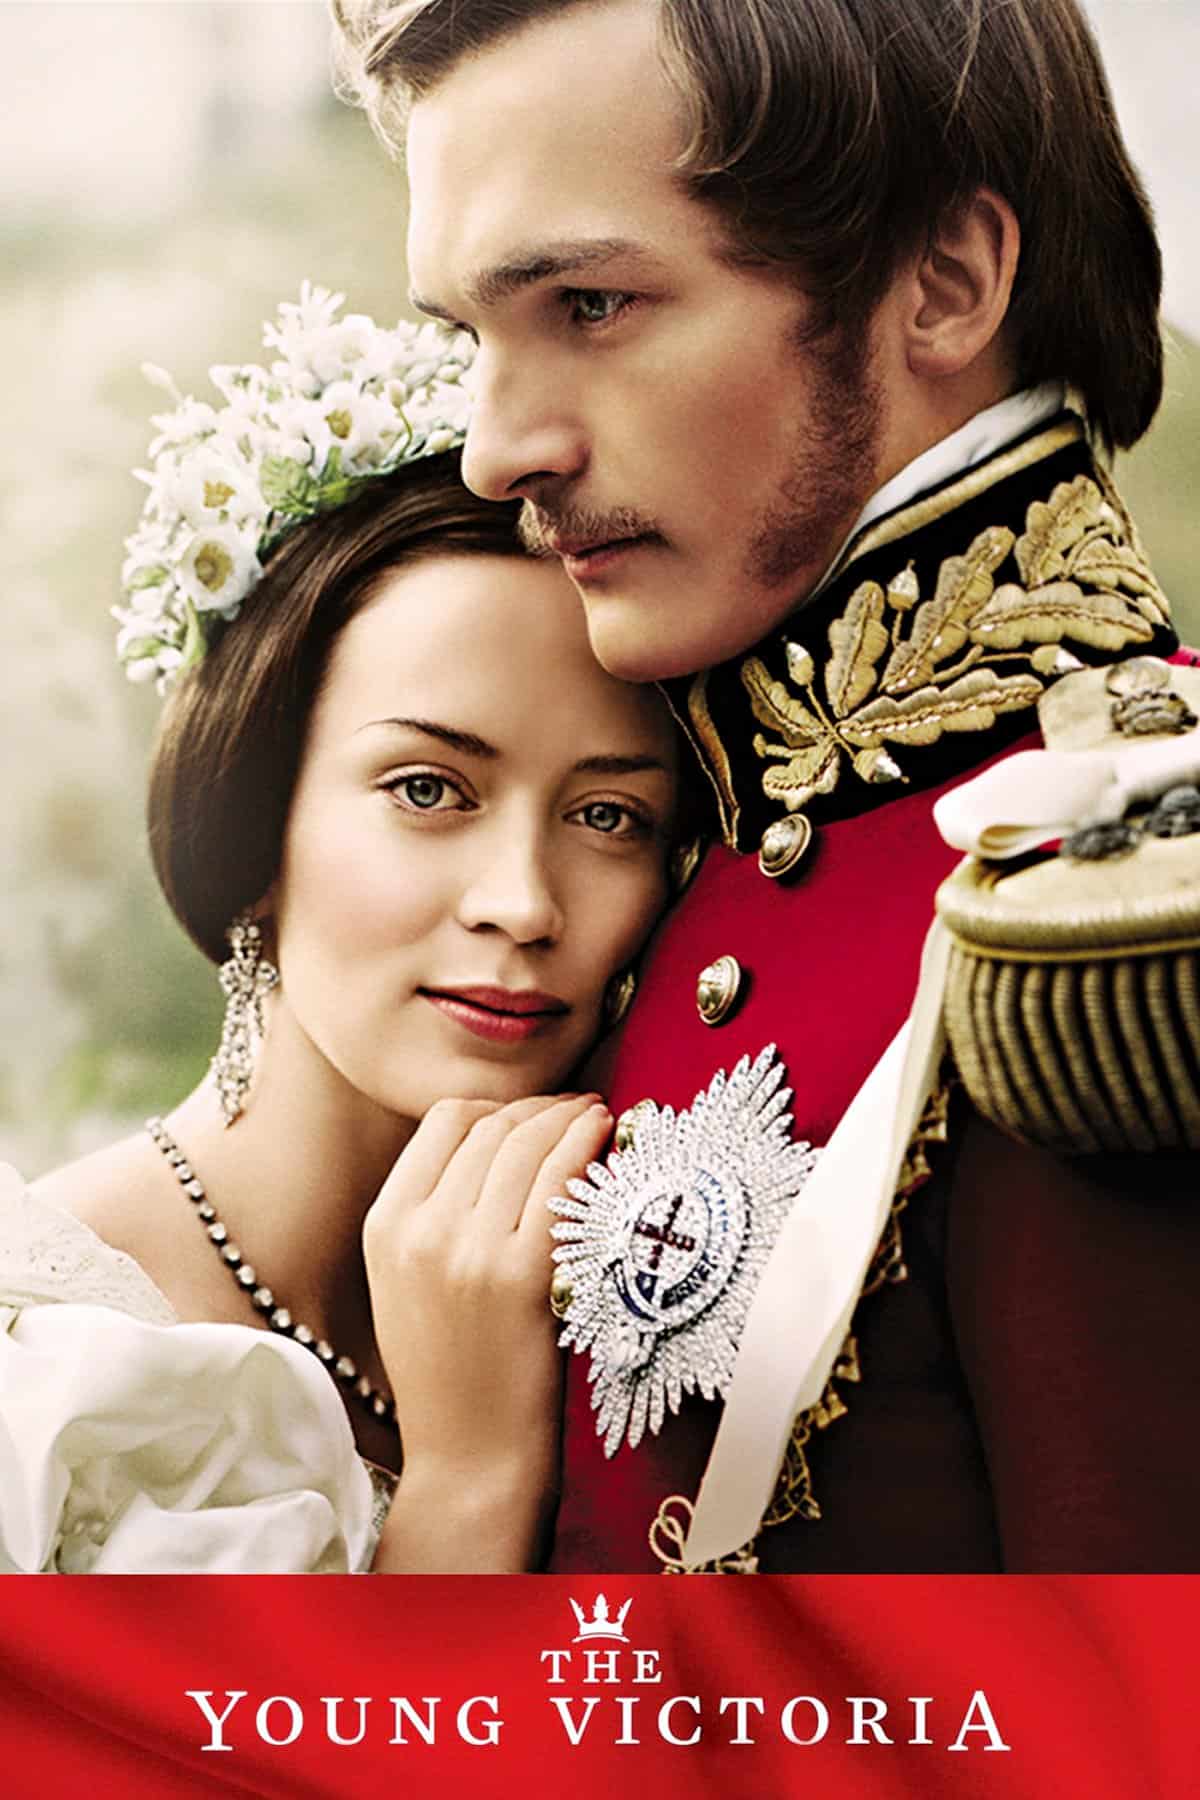 The Young Victoria, 2009 